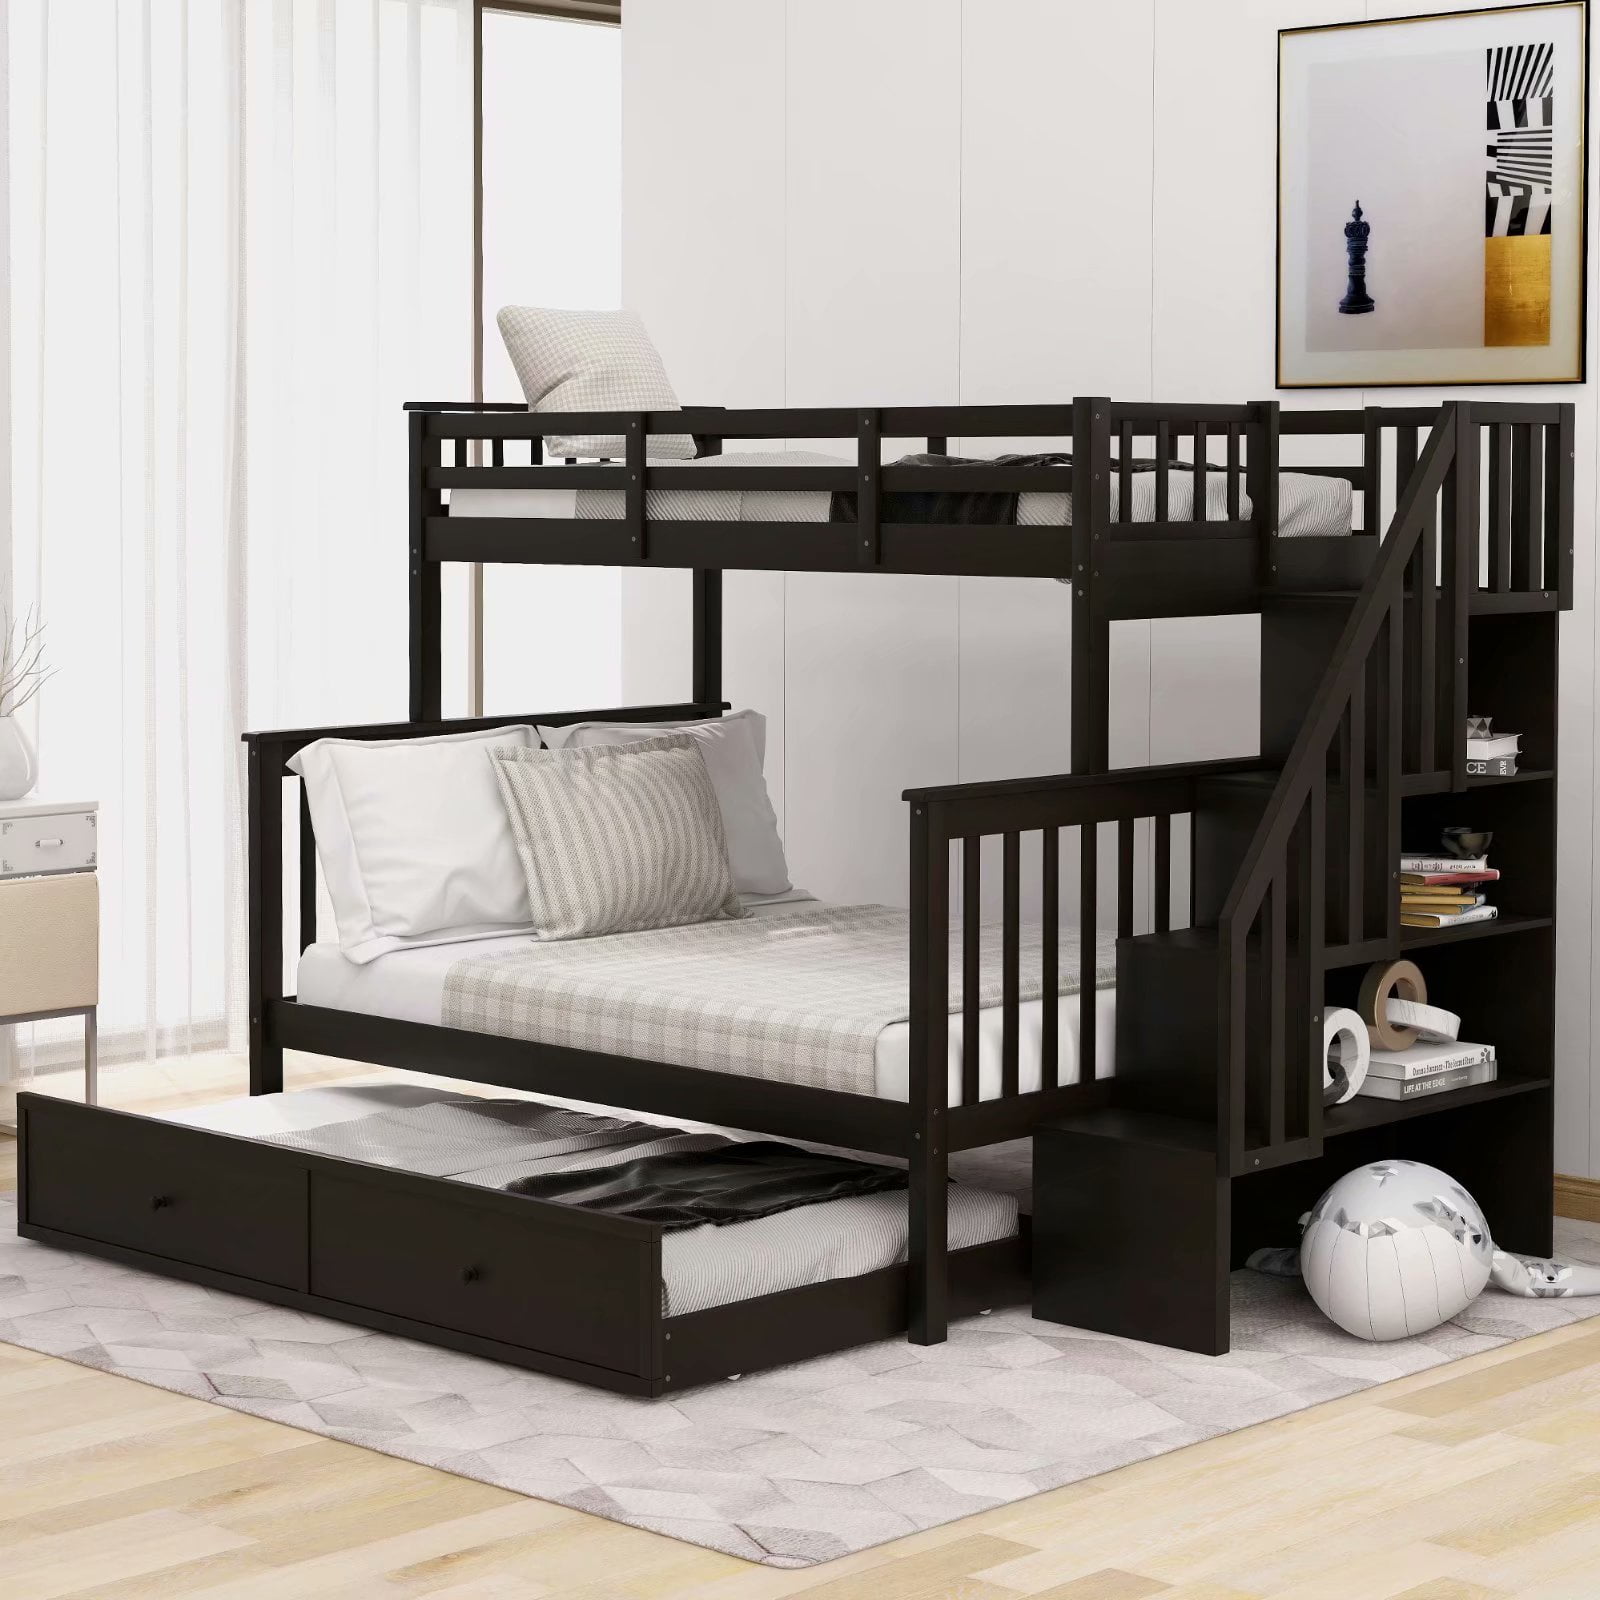 Twin Over Full Bunk Bed With Size, Black Wood Bunk Beds Twin Over Full